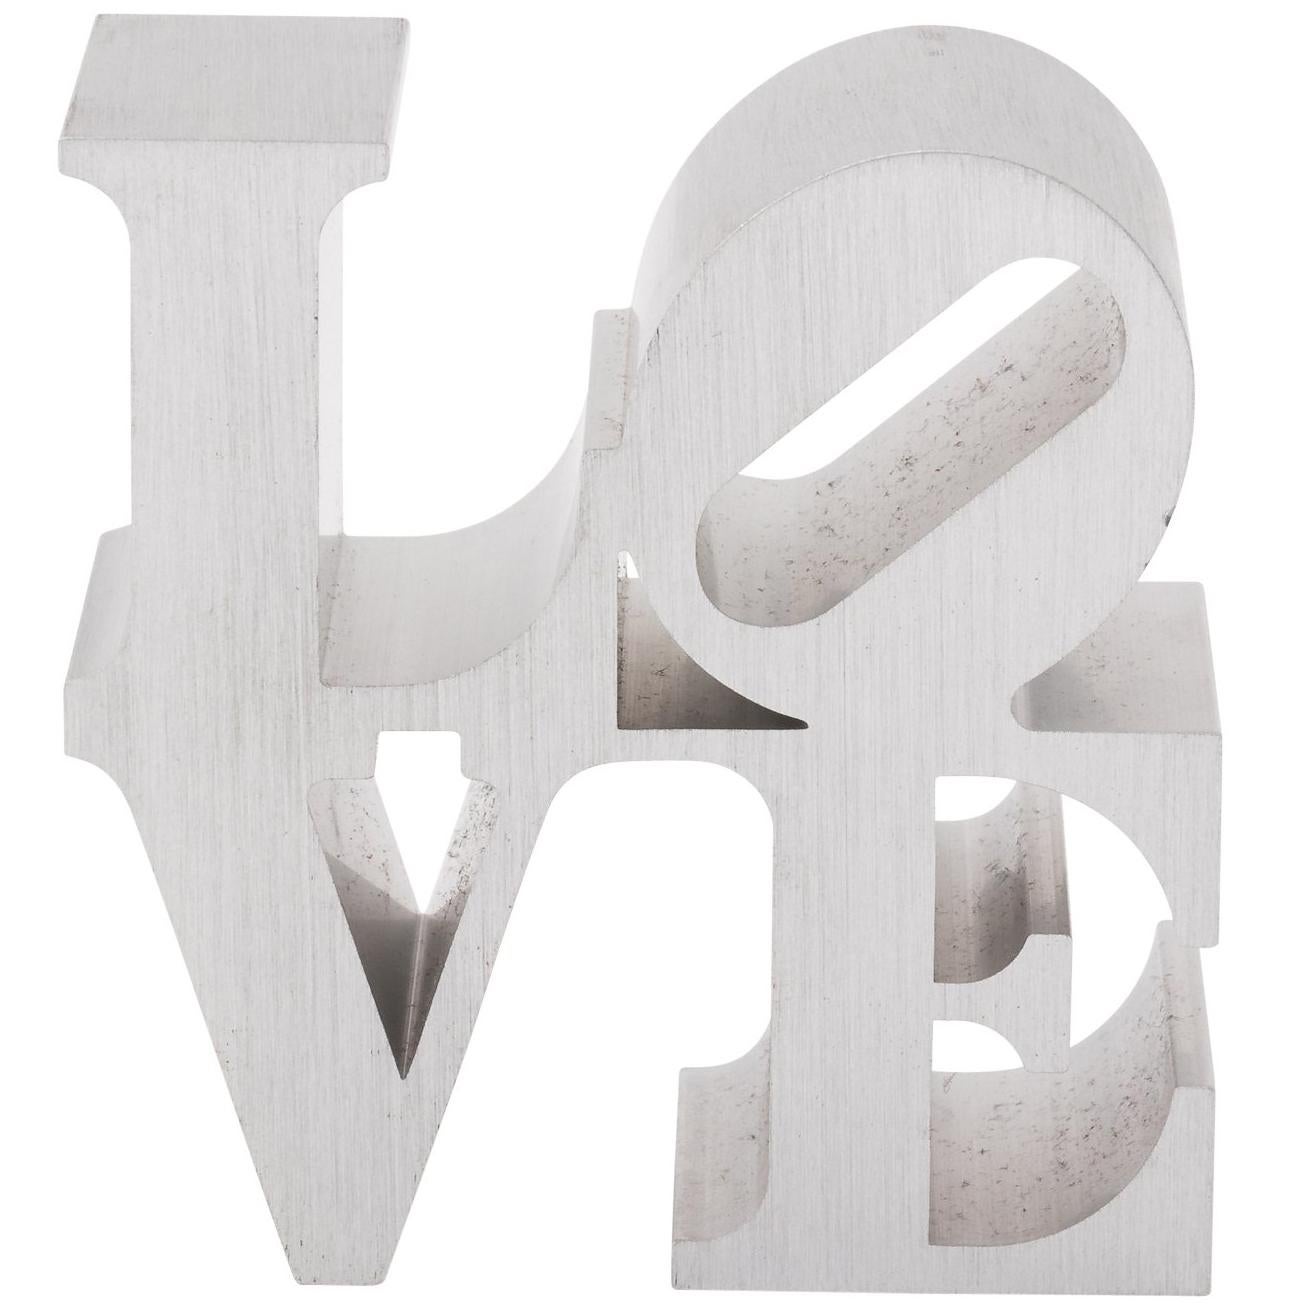 Robert Indiana "Love" Paperweight For Sale